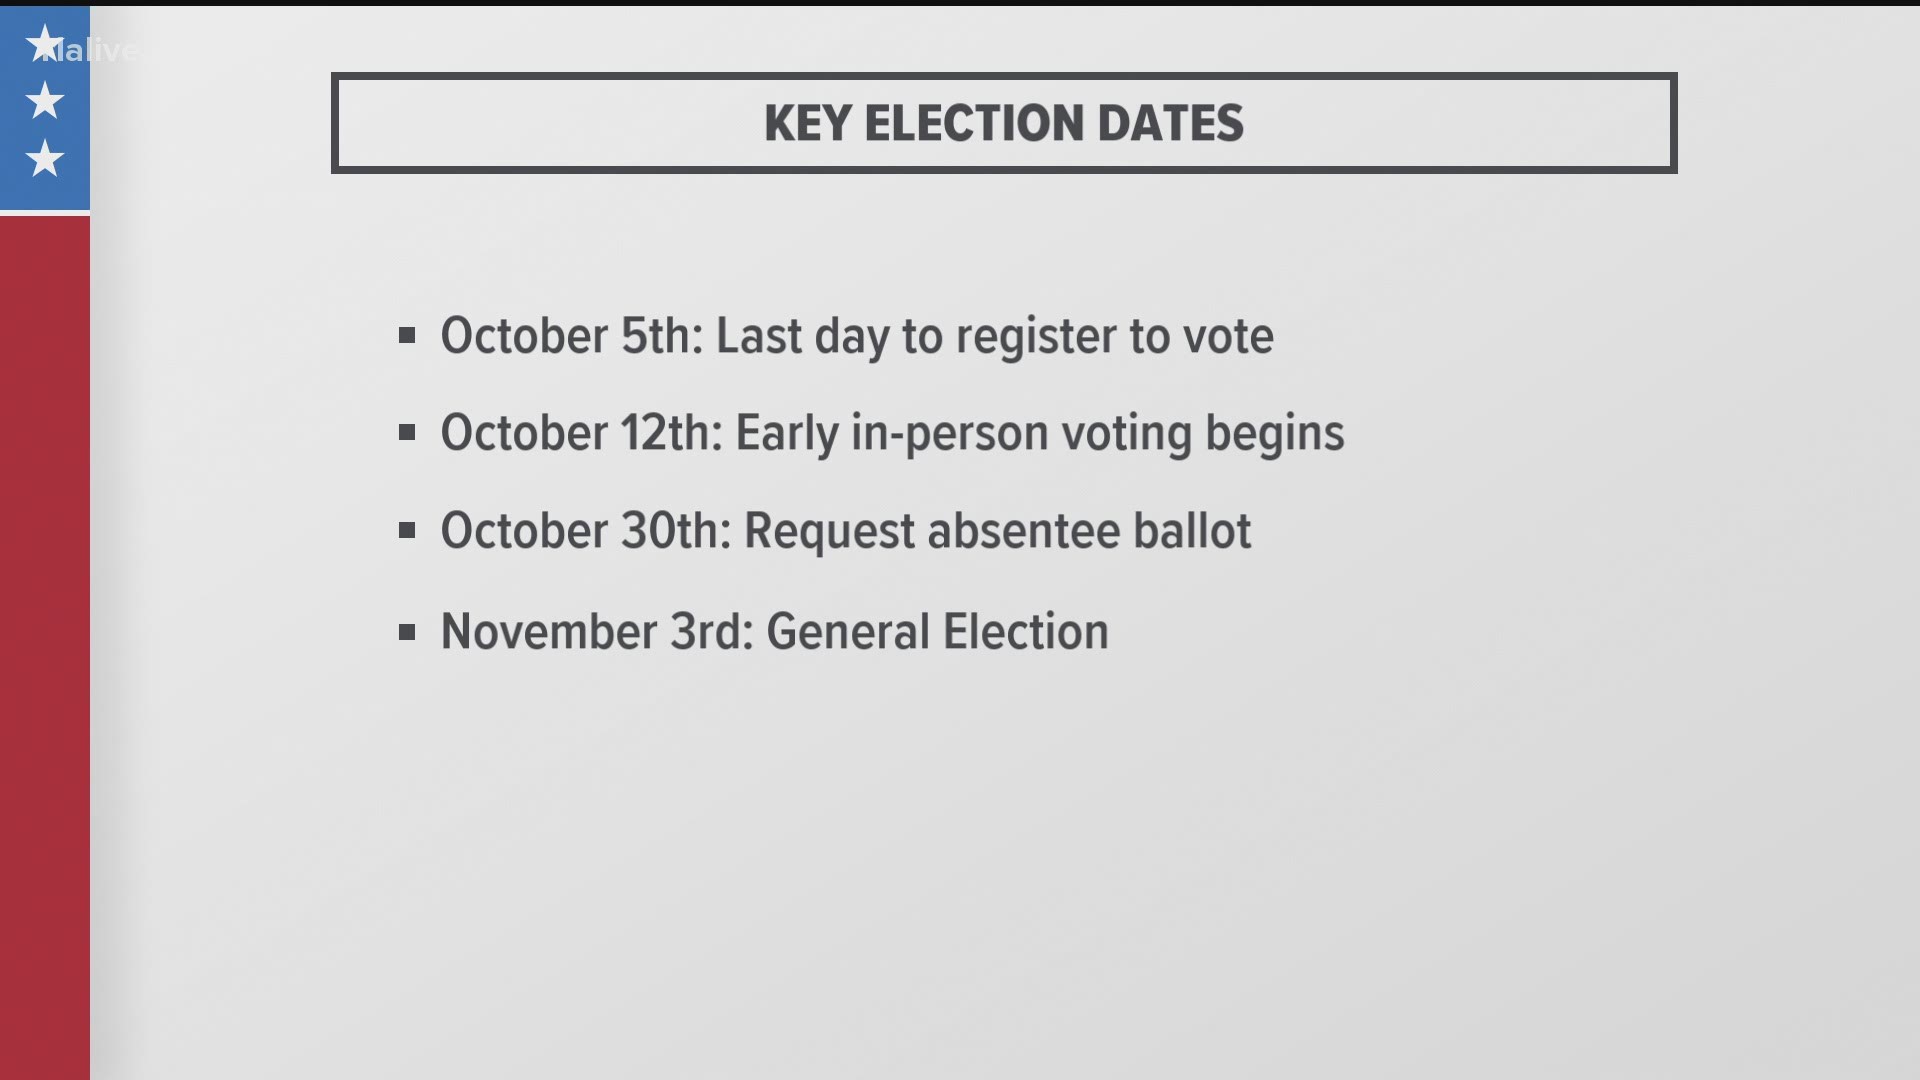 Oct. 5 is the last day to register to vote for the Nov. 3 general election.